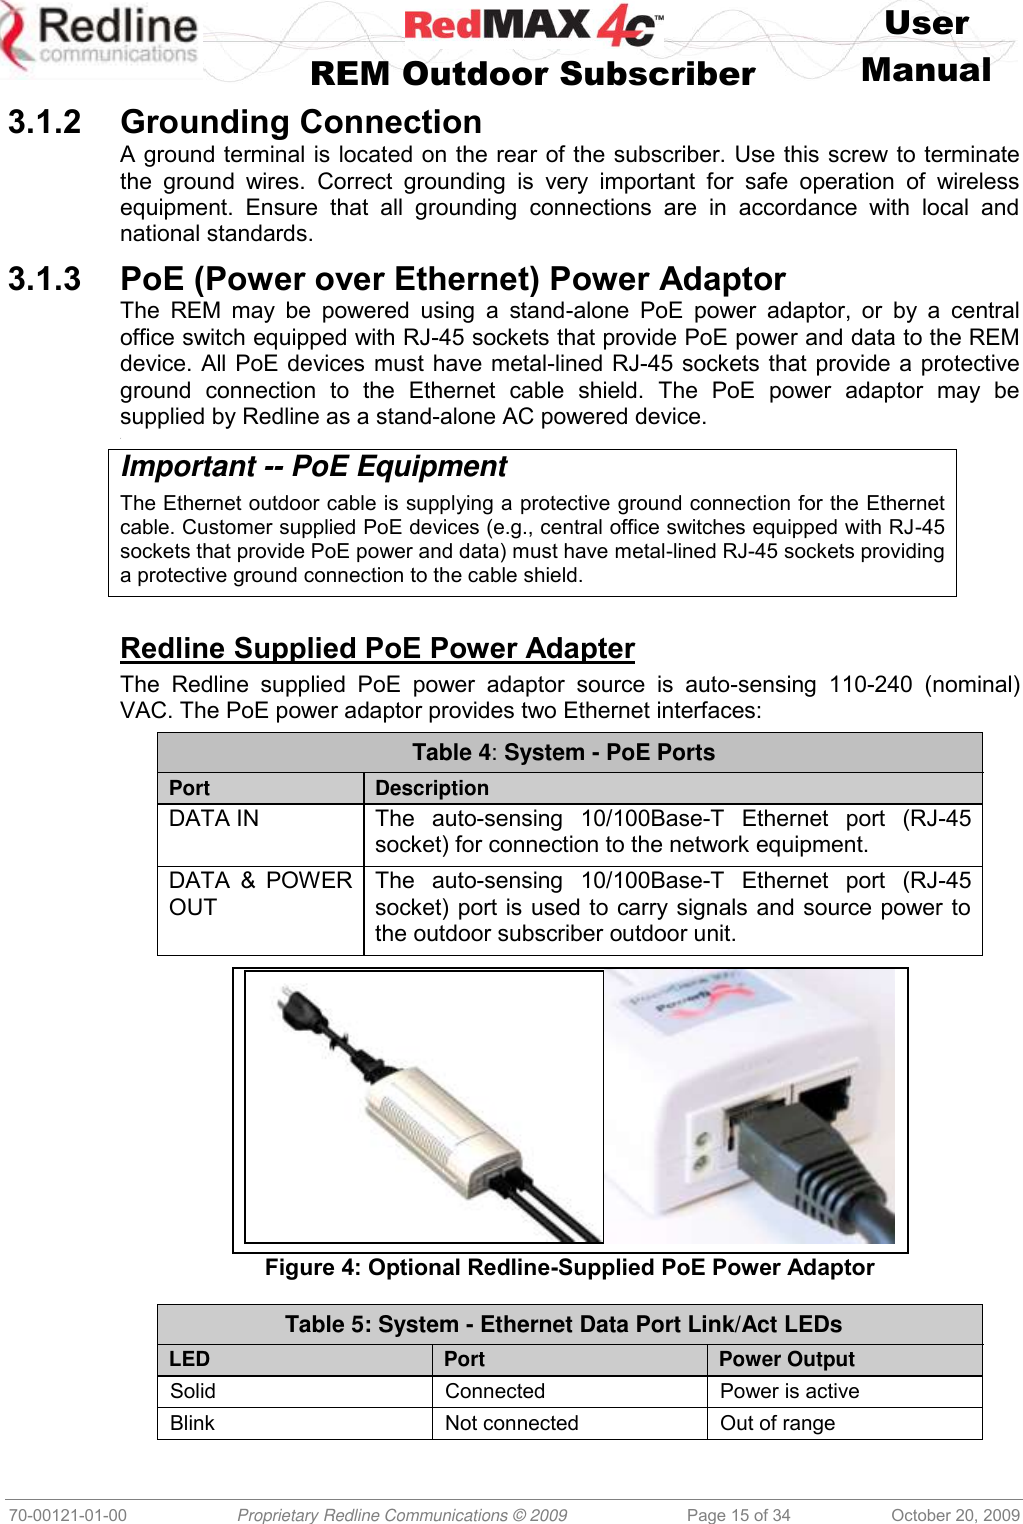    User   REM Outdoor Subscriber  Manual   70-00121-01-00 Proprietary Redline Communications © 2009 Page 15 of 34 October 20, 2009 3.1.2 Grounding Connection A ground terminal is located on the rear of the subscriber. Use this screw to terminate the  ground  wires.  Correct  grounding  is  very  important  for  safe  operation  of  wireless equipment.  Ensure  that  all  grounding  connections  are  in  accordance  with  local  and national standards. 3.1.3 PoE (Power over Ethernet) Power Adaptor The  REM  may  be  powered  using  a  stand-alone PoE  power  adaptor,  or  by  a  central office switch equipped with RJ-45 sockets that provide PoE power and data to the REM device. All PoE devices must have metal-lined RJ-45 sockets that provide a protective ground  connection  to  the  Ethernet  cable  shield.  The  PoE  power  adaptor  may  be supplied by Redline as a stand-alone AC powered device. &lt; Important -- PoE Equipment The Ethernet outdoor cable is supplying a protective ground connection for the Ethernet cable. Customer supplied PoE devices (e.g., central office switches equipped with RJ-45 sockets that provide PoE power and data) must have metal-lined RJ-45 sockets providing a protective ground connection to the cable shield.  Redline Supplied PoE Power Adapter The  Redline  supplied  PoE  power  adaptor  source  is  auto-sensing  110-240  (nominal) VAC. The PoE power adaptor provides two Ethernet interfaces: Table 4: System - PoE Ports  Port Description DATA IN The  auto-sensing  10/100Base-T  Ethernet  port  (RJ-45 socket) for connection to the network equipment. DATA  &amp;  POWER OUT The  auto-sensing  10/100Base-T  Ethernet  port  (RJ-45 socket) port is used to carry signals and source power to the outdoor subscriber outdoor unit.   Figure 4: Optional Redline-Supplied PoE Power Adaptor  Table 5: System - Ethernet Data Port Link/Act LEDs  LED Port Power Output Solid Connected Power is active Blink Not connected Out of range 